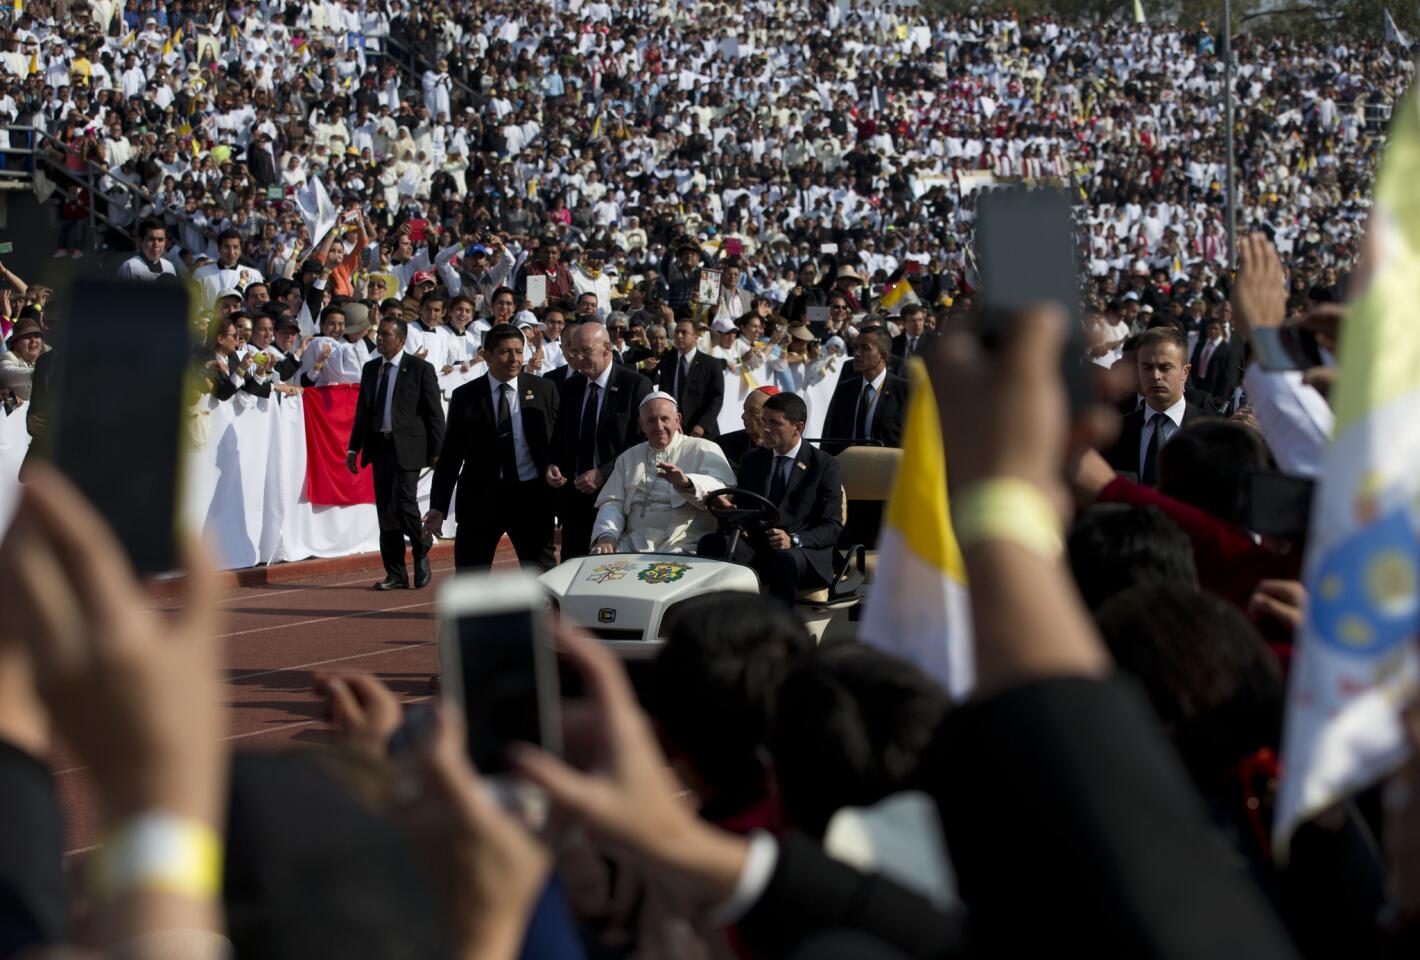 Pope Francis arrives for Mass in a golf cart at Venustiano Carranza stadium in Morelia, Mexico, Tuesday, Feb. 16, 2016.